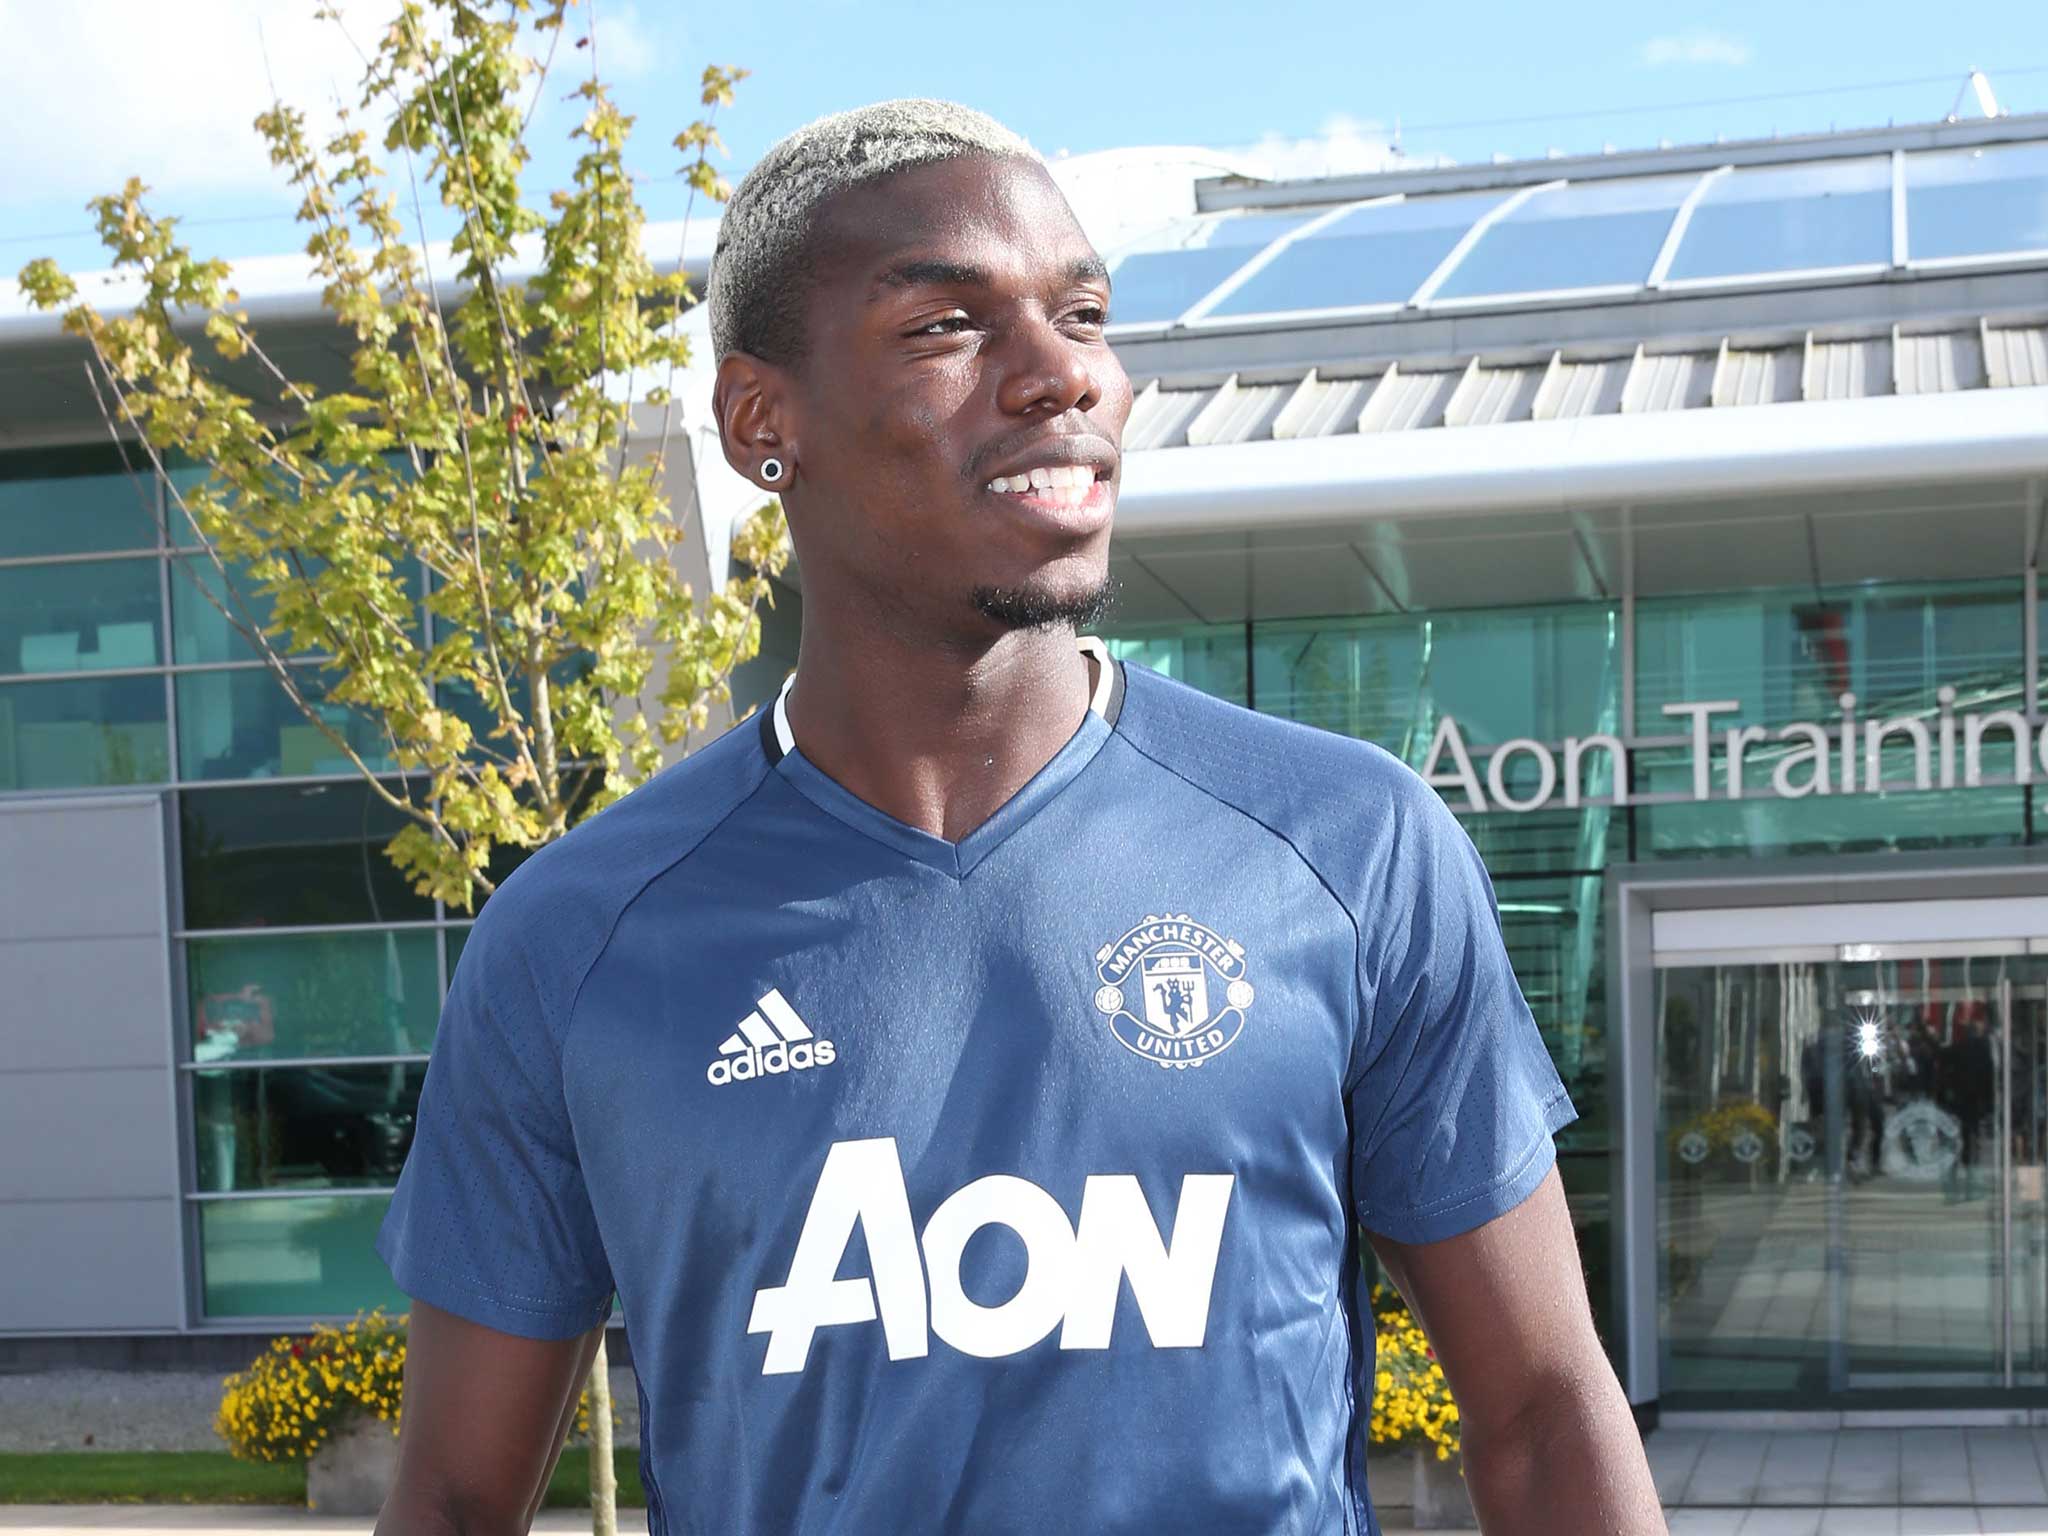 Paul Pogba during his first training session back at Manchester United